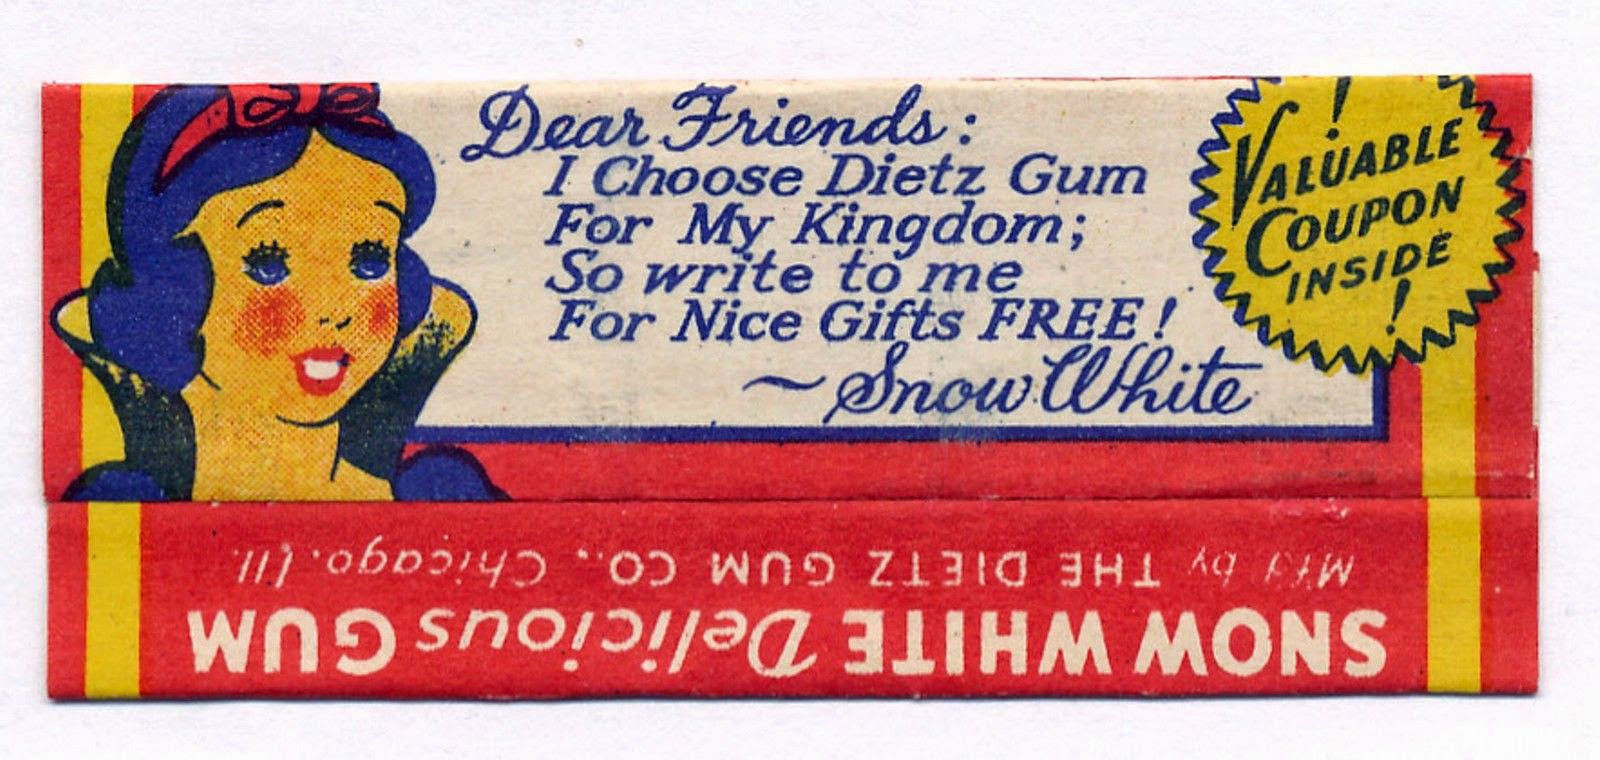 Filmic Light - Snow White Archive: Vintage Snow White Chewing Gum by Dietz